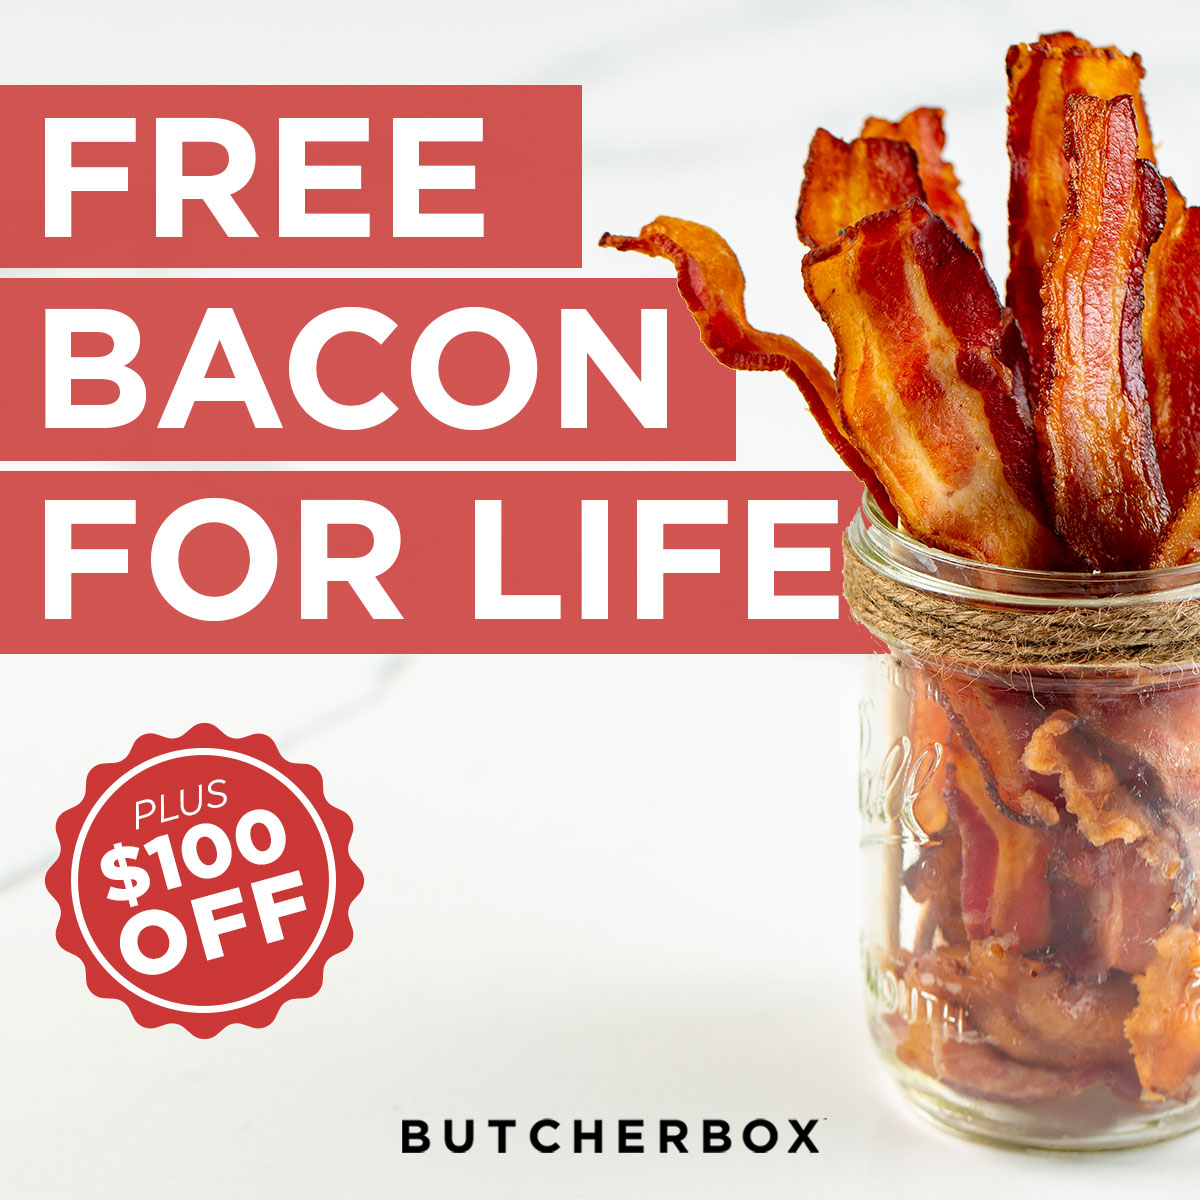 Free Bacon For Life Advertisement.